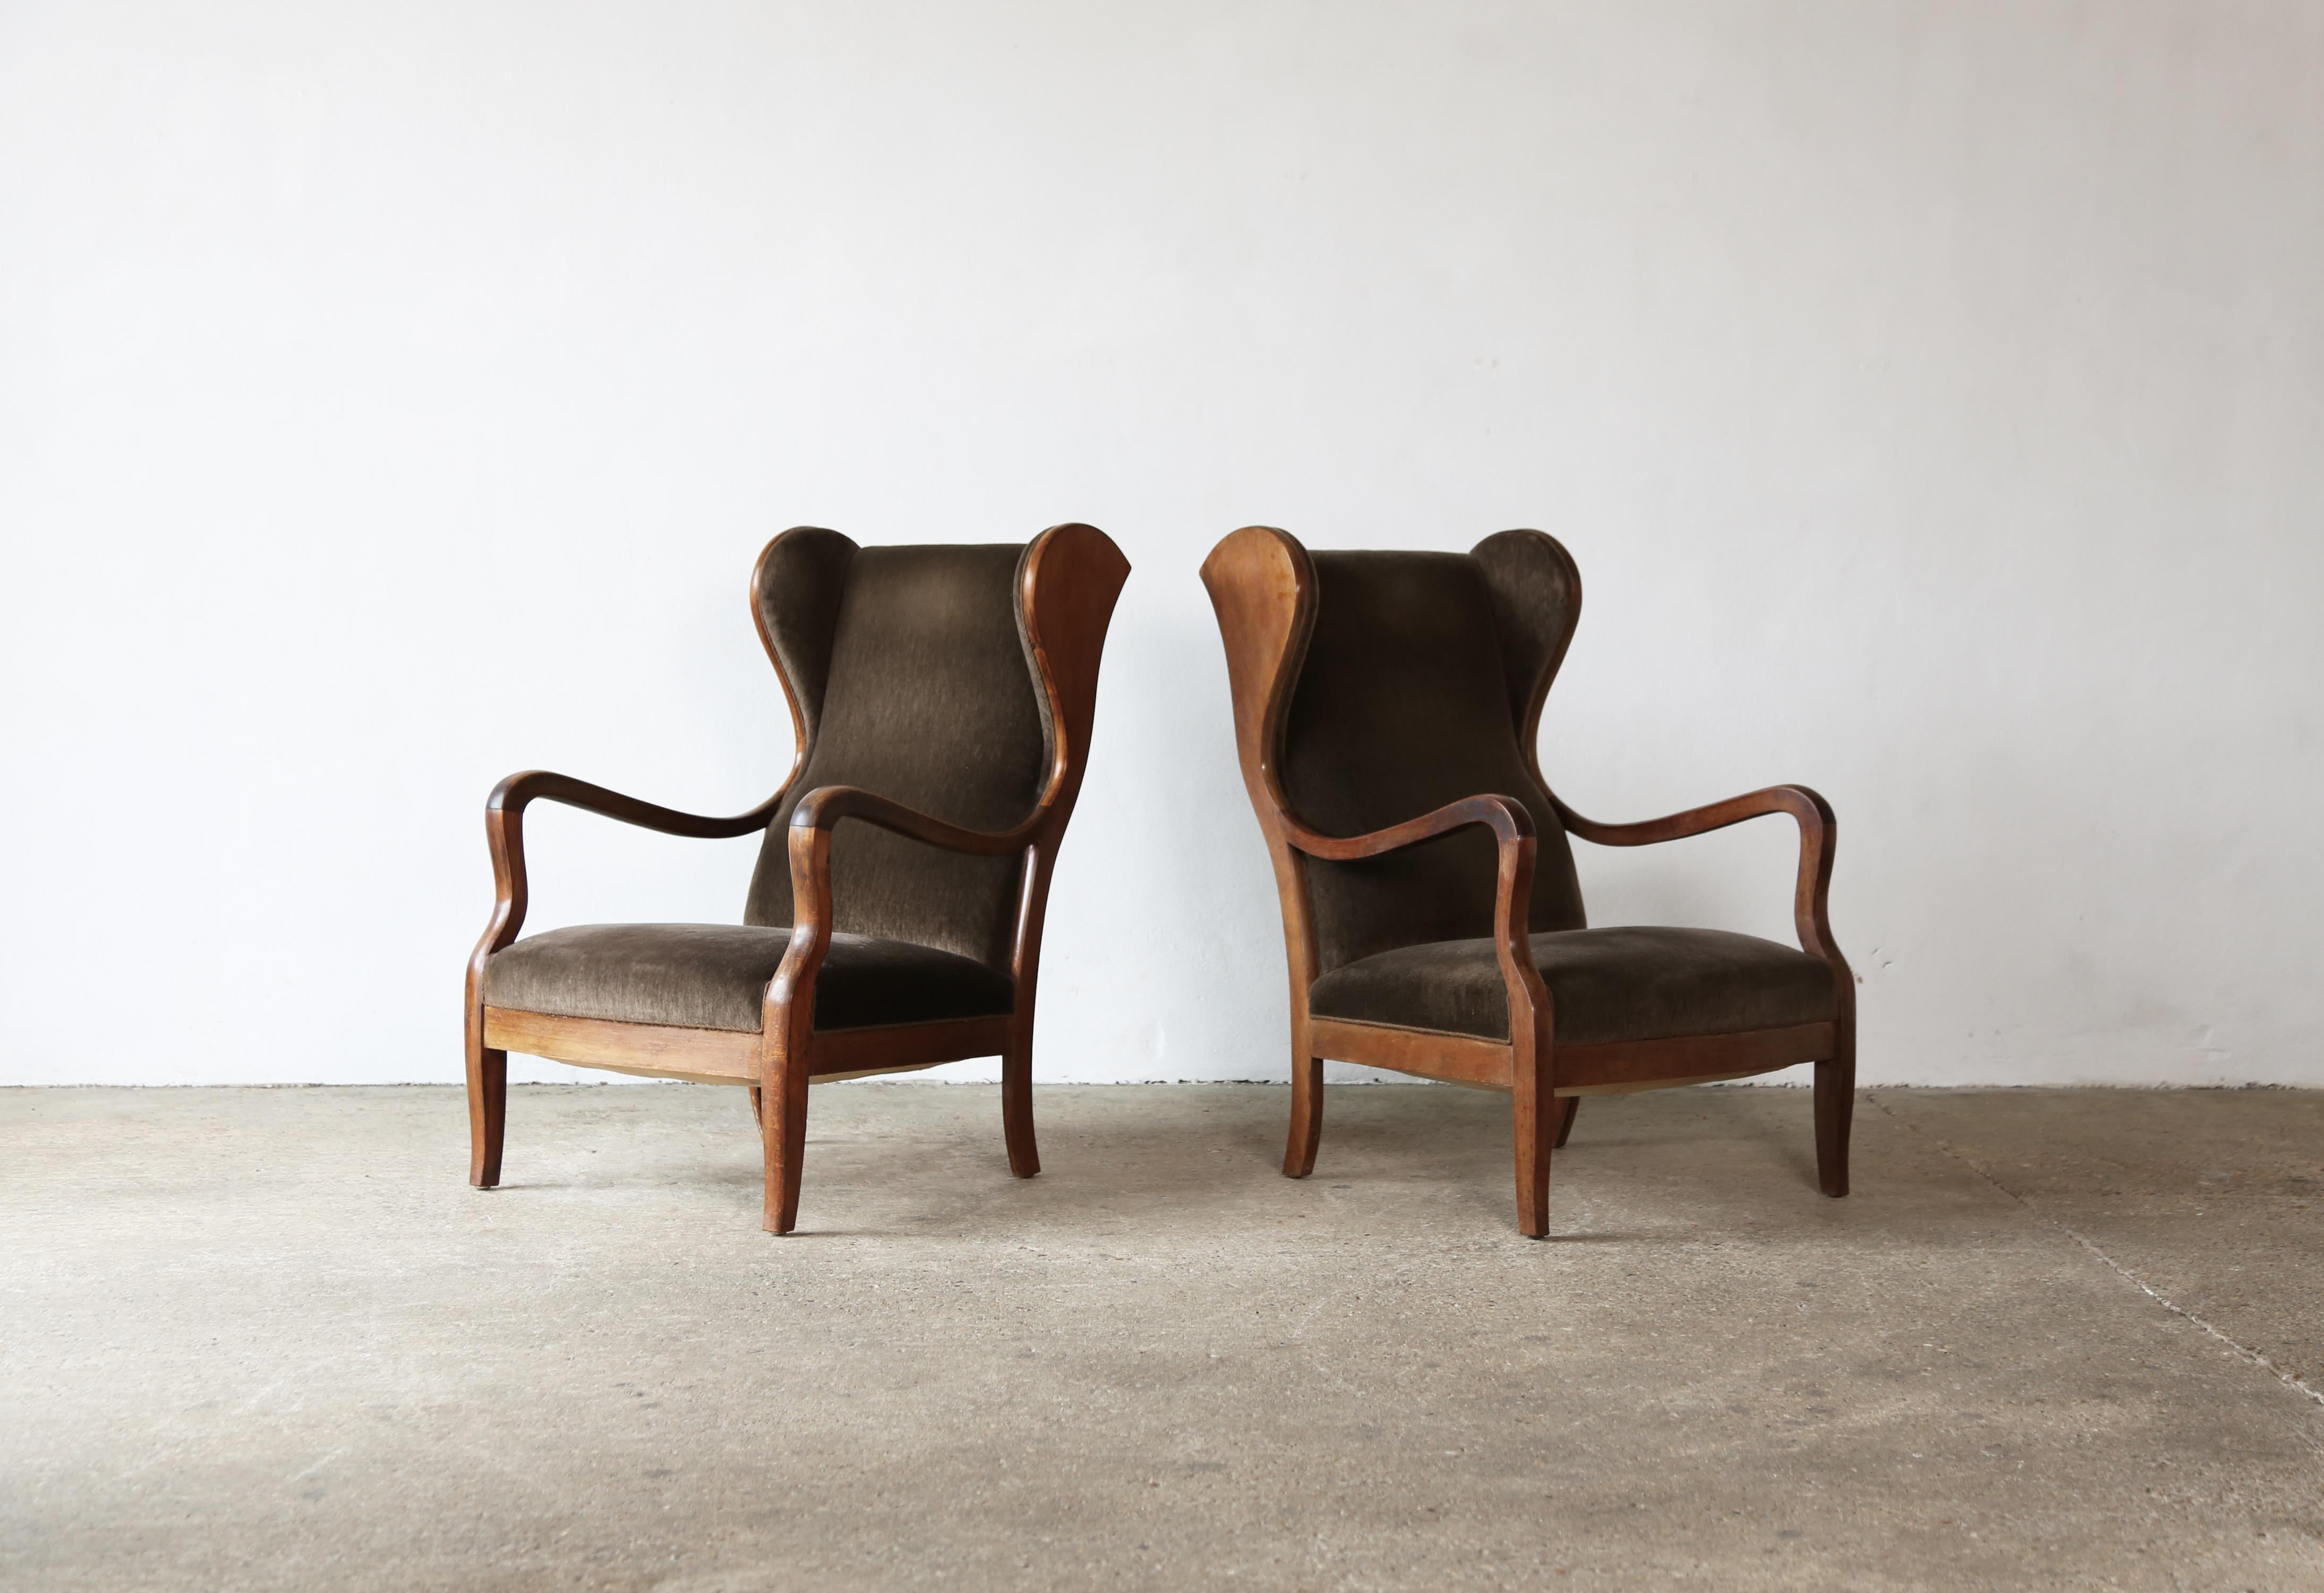 An original pair of Frits Henningsen chairs, Denmark, 1940s. Designed and produced by Frits Henningsen, Copenhagen. The chairs have presumably been reupholstered at some point in their history but is easy to recover in different fabric if desired.